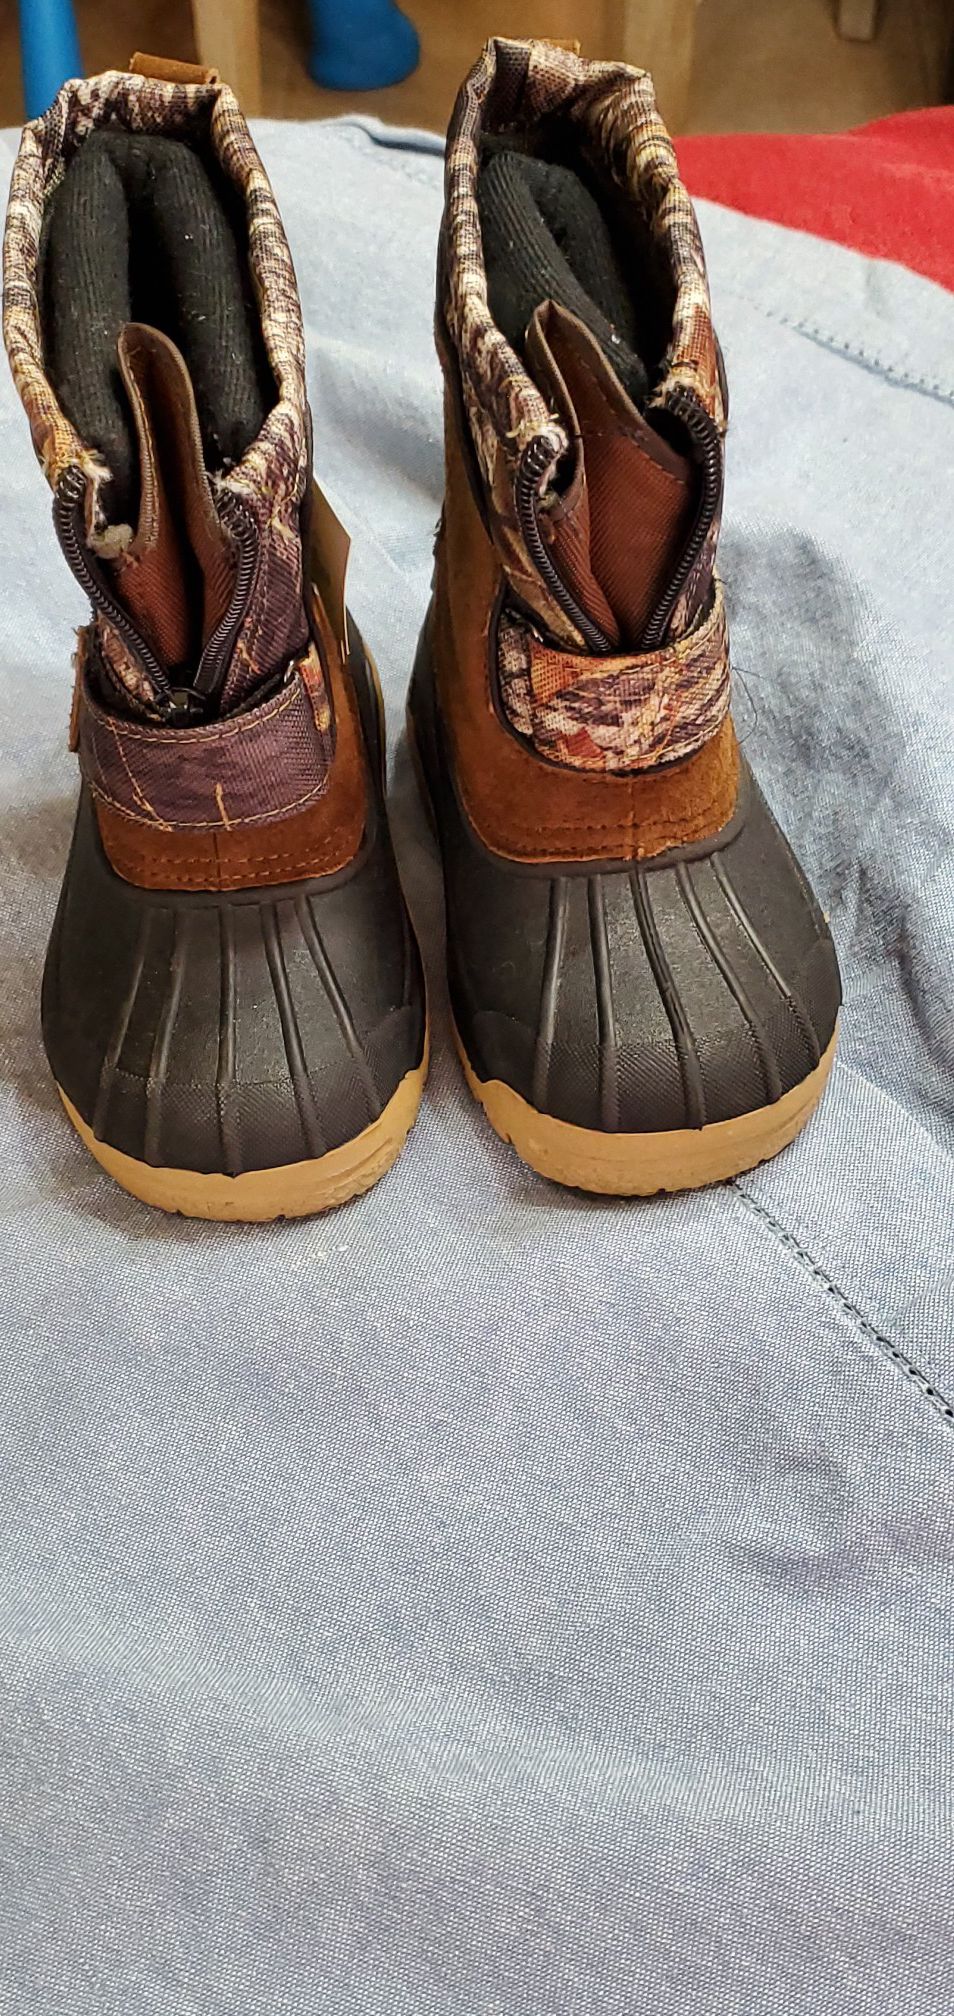 Snow boots Toddler size 7 ozark trail